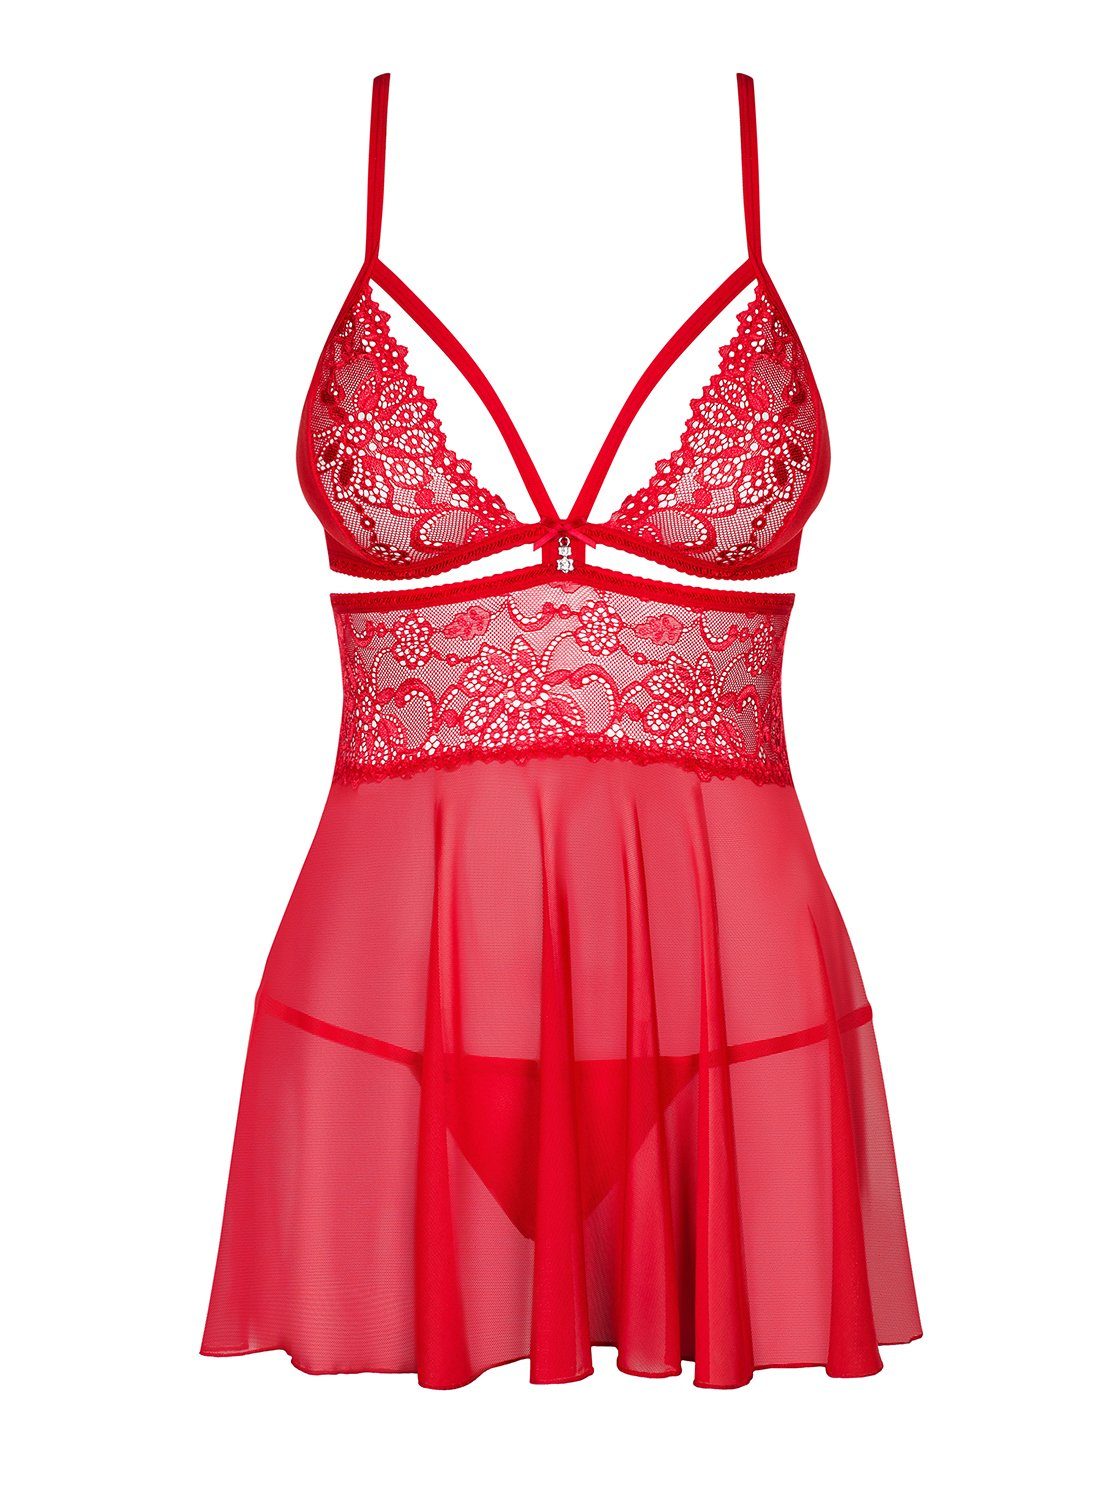 mit Chemise (2-tlg) Negligé Obsessive Dessous String rot Babydoll Negligee